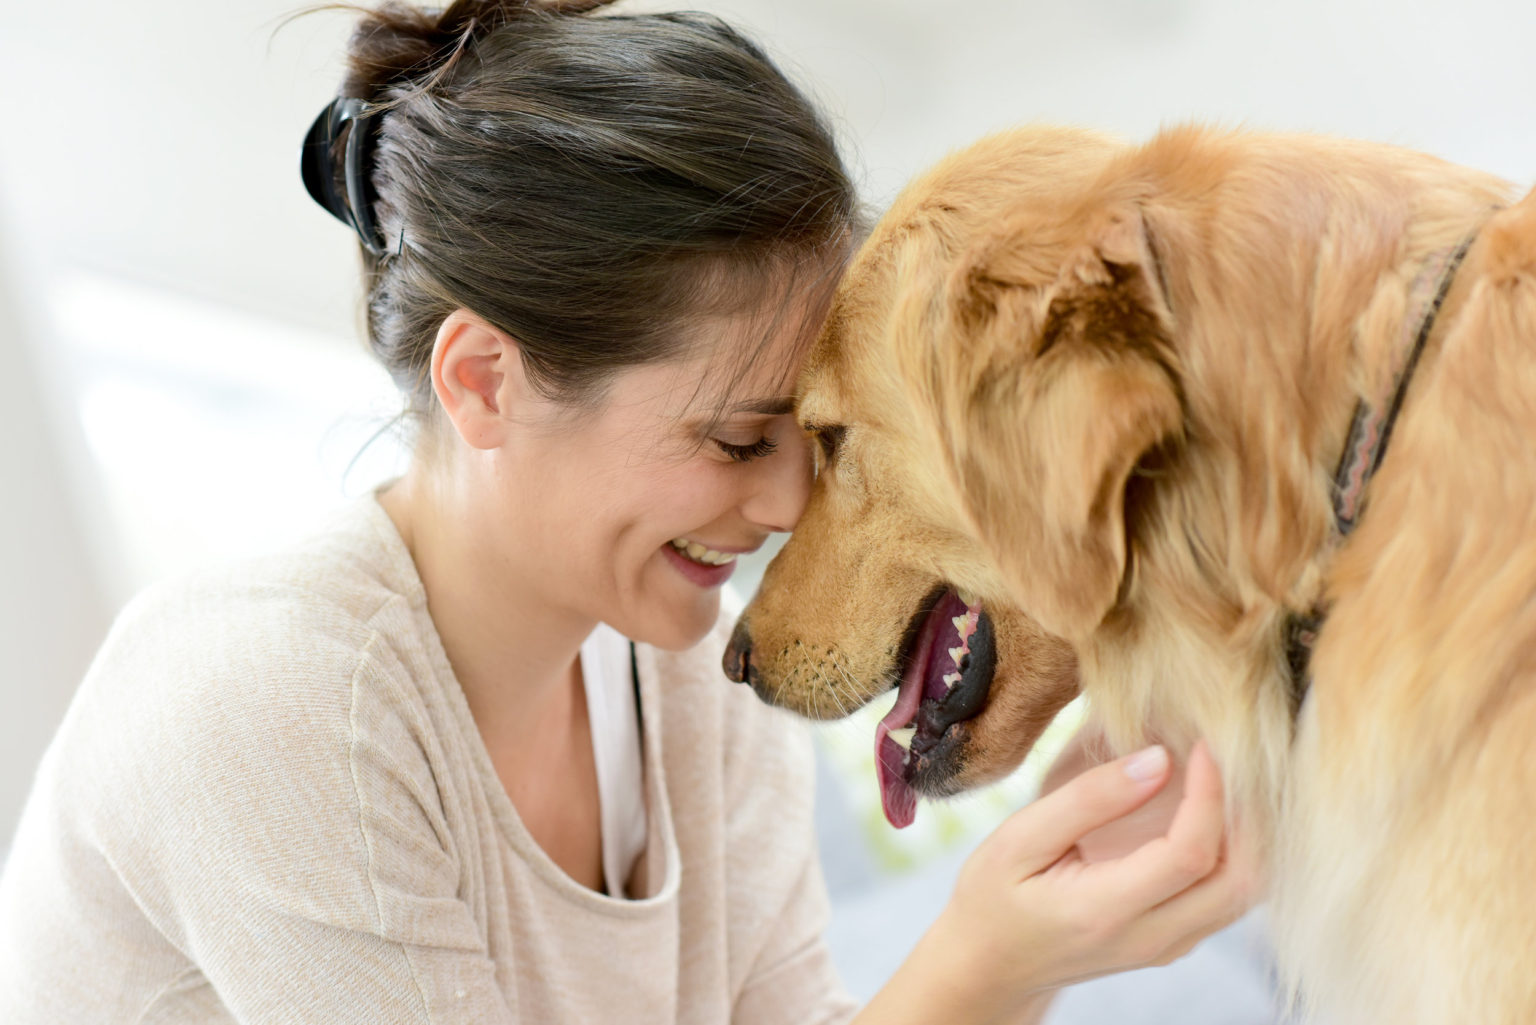 10 Dogs Language Explained: How to Understand Your Dog Better